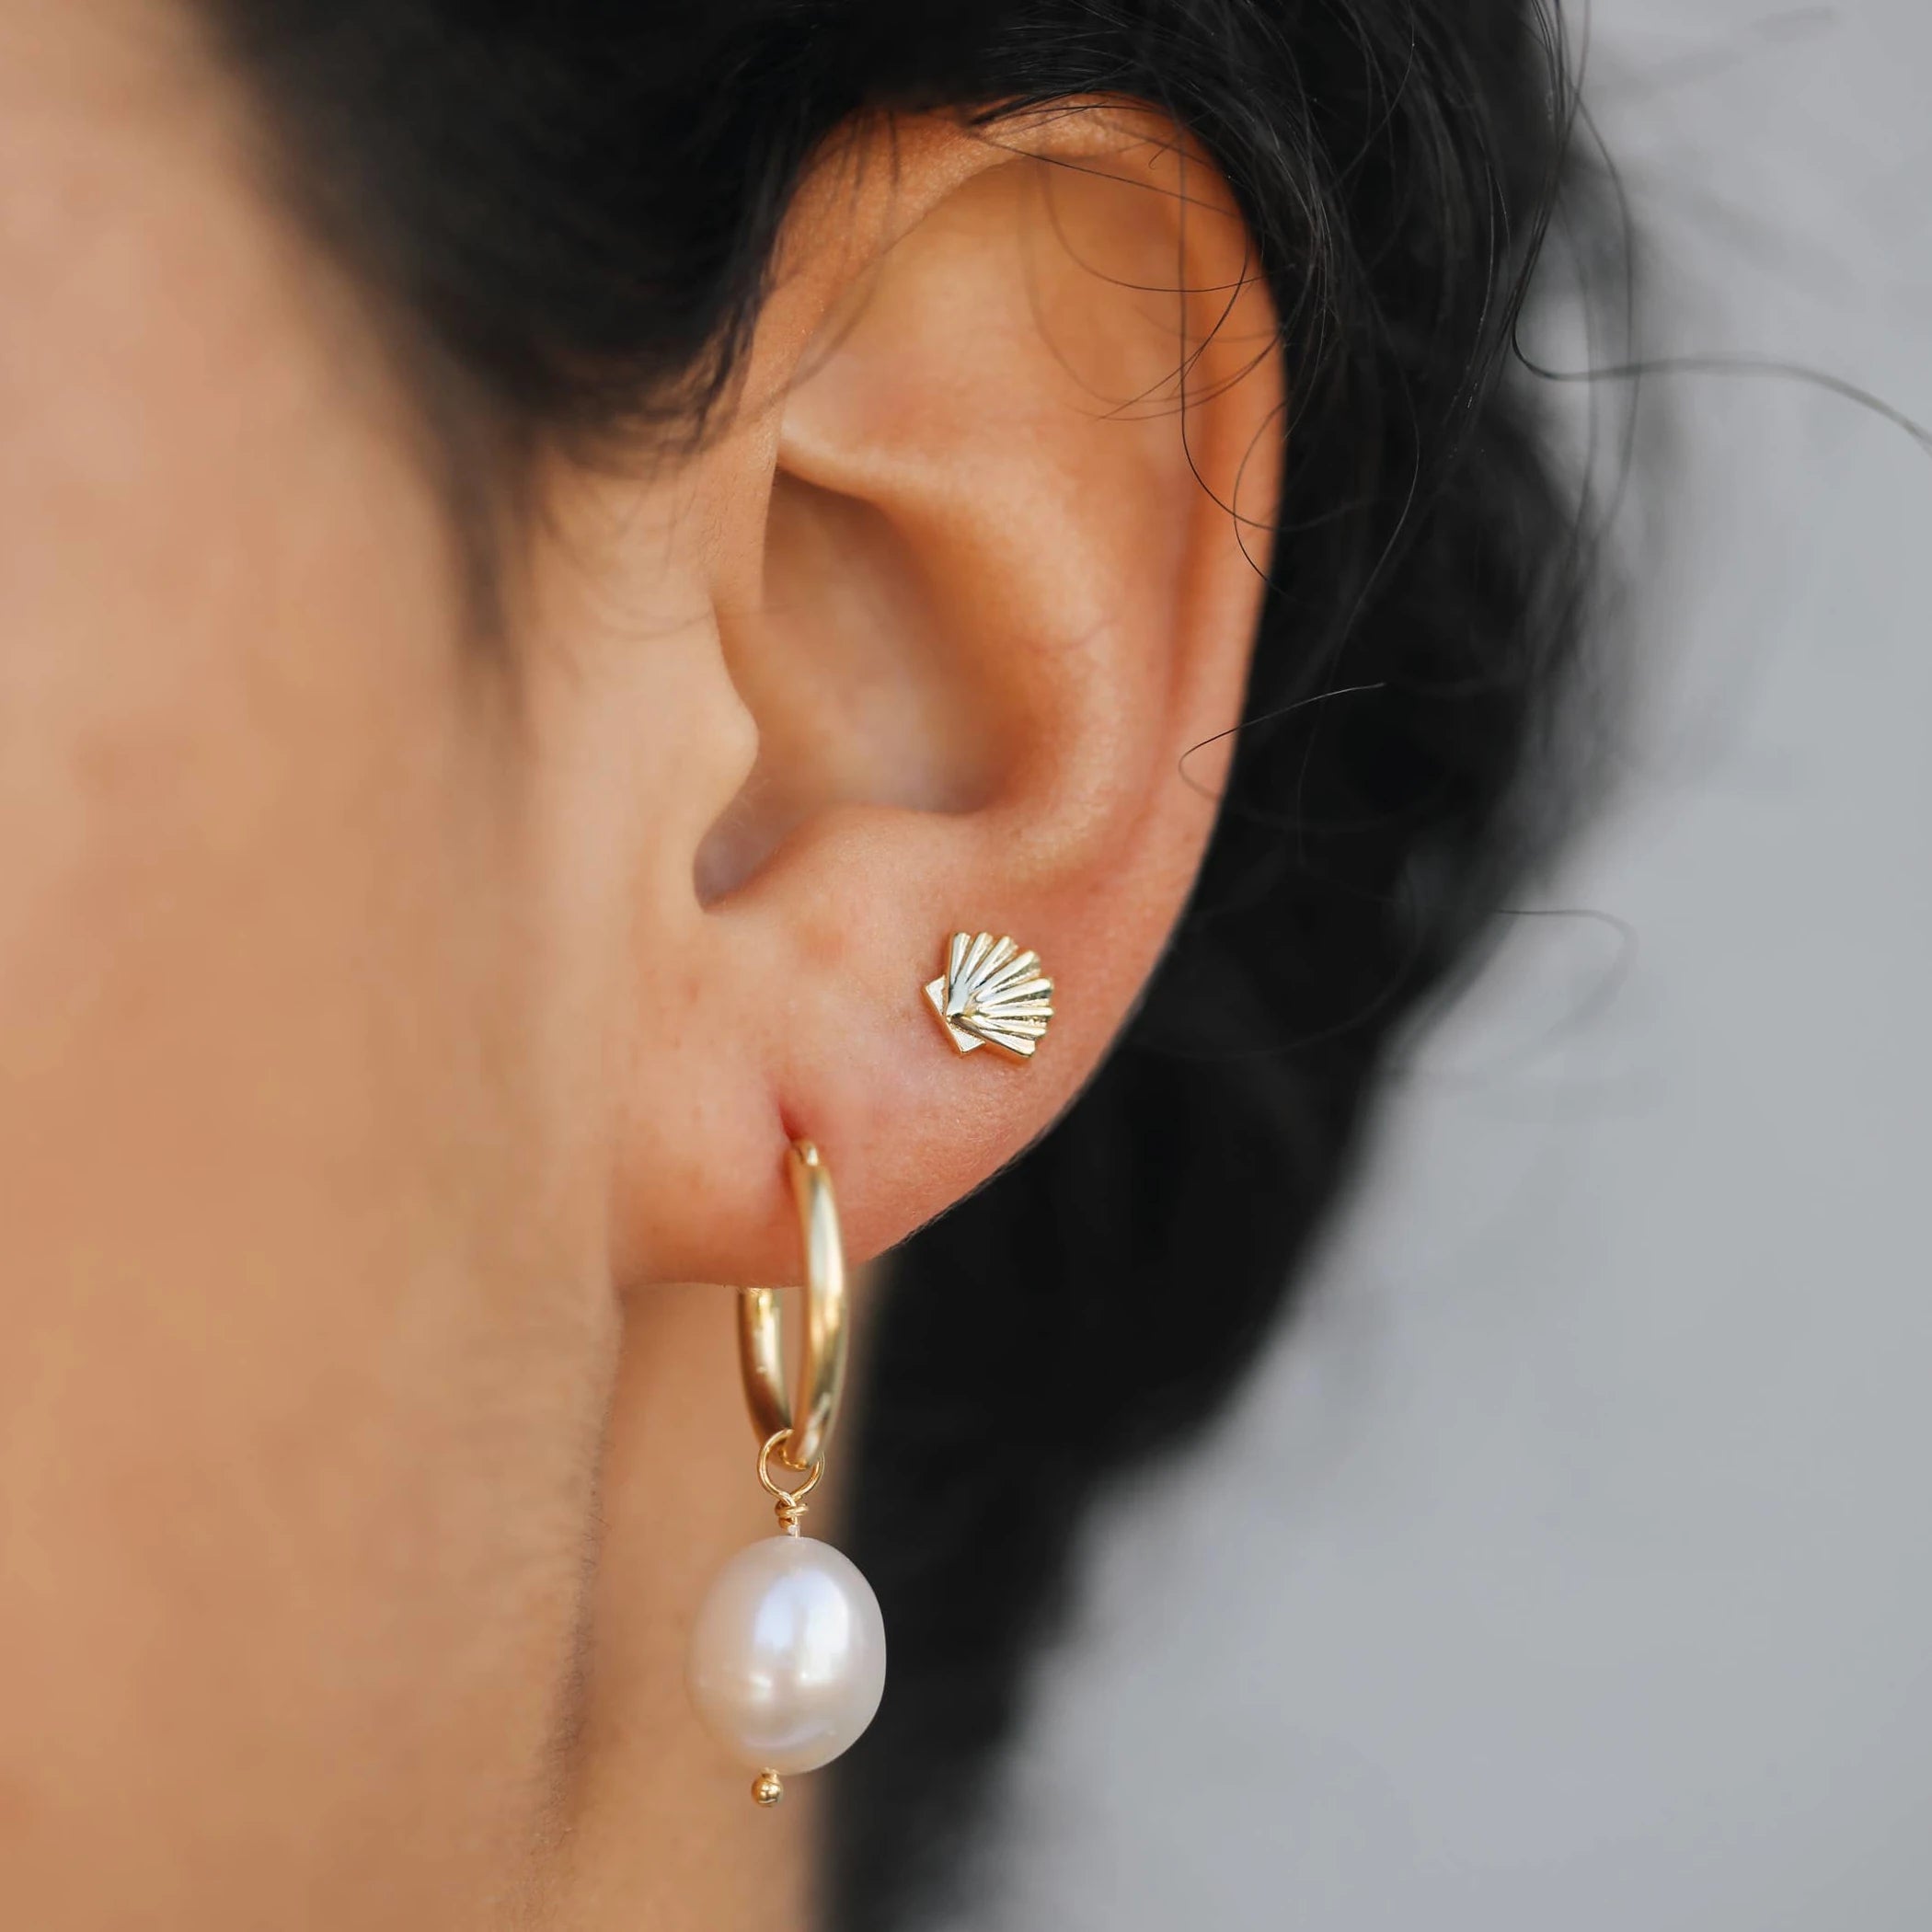 Gold plated seashell earrings styled with an elegant pearl earring. 